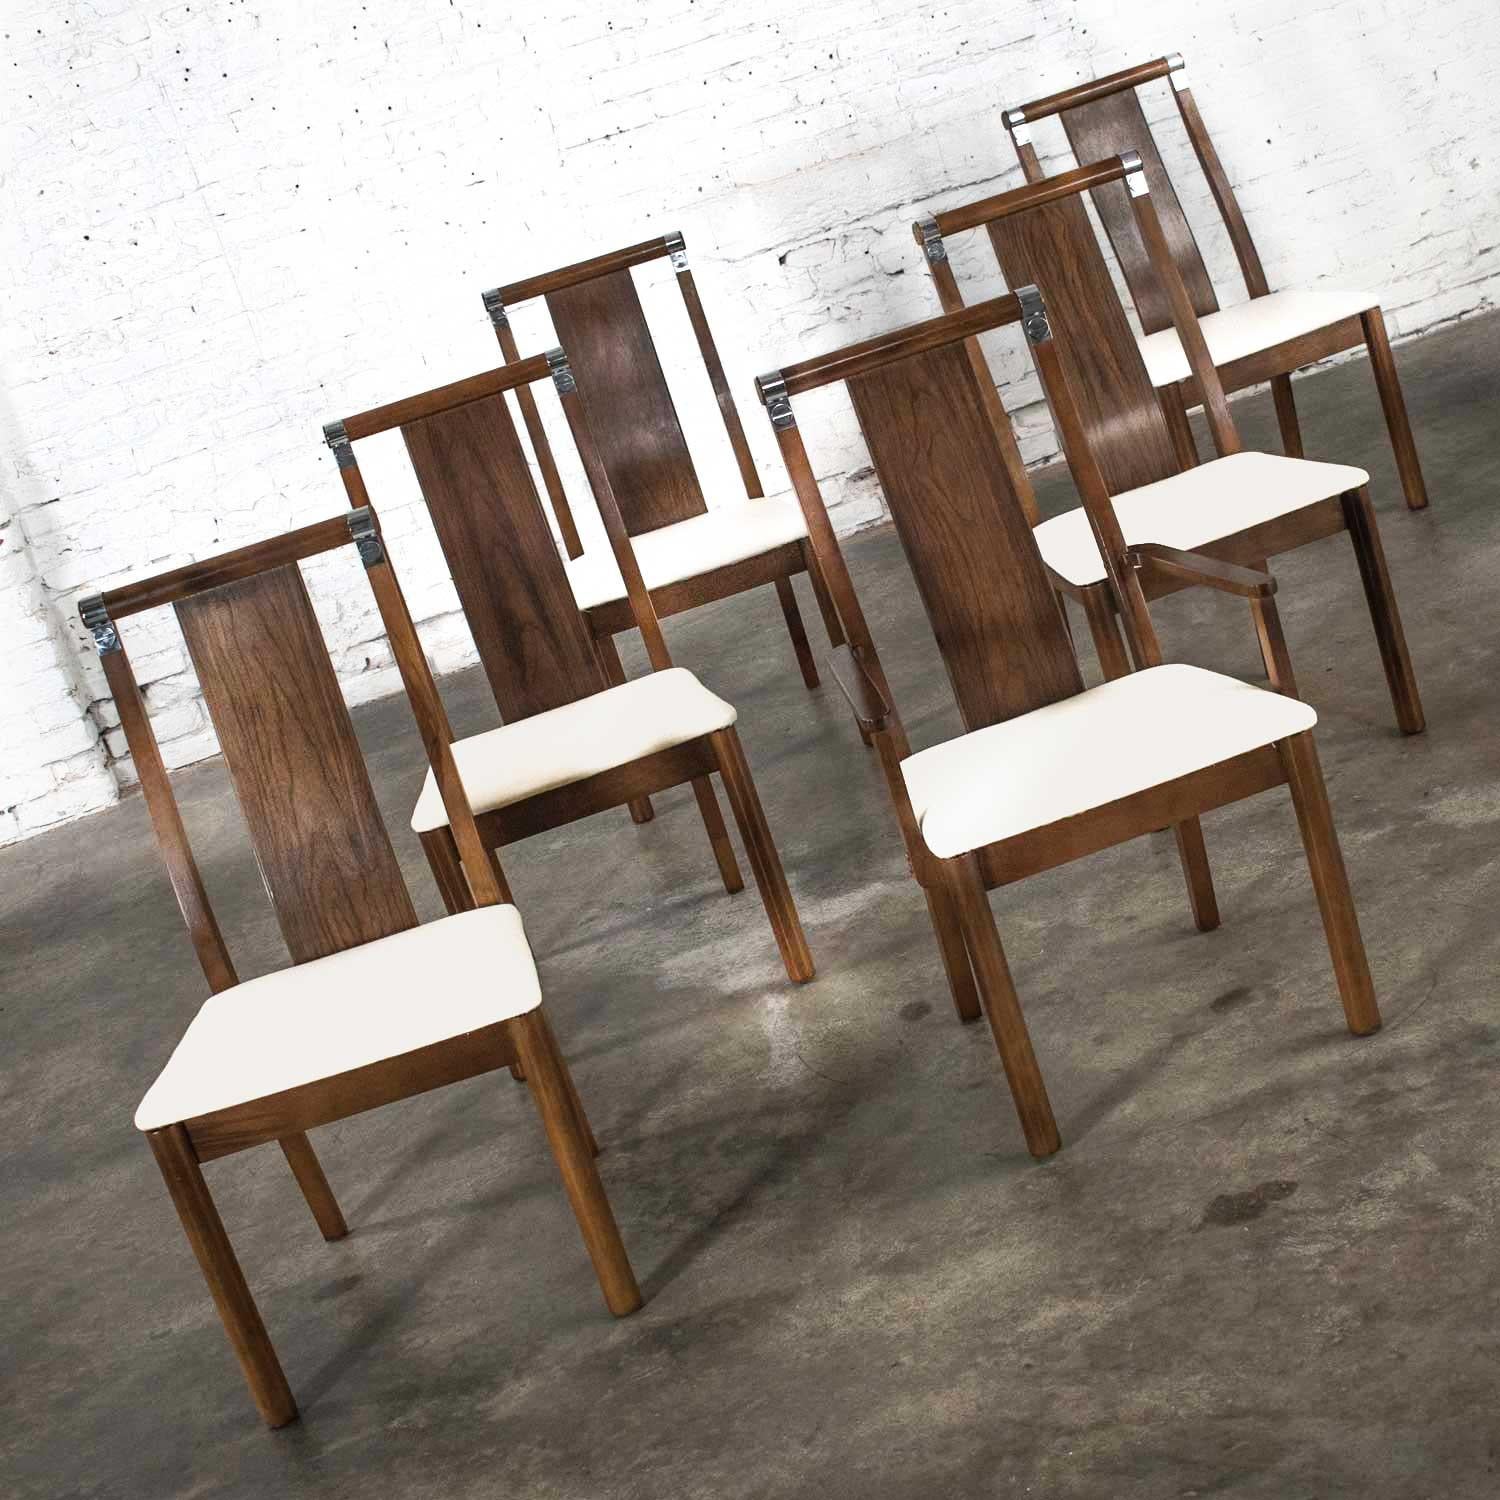 Gorgeous Mid-Century Modern dining chairs set of six 5 side and 1 armchair comprised of walnut veneer and walnut colored stained wood; chrome accents; and new off-white canvas upholstery. Beautiful condition and normal wear as would be expected with